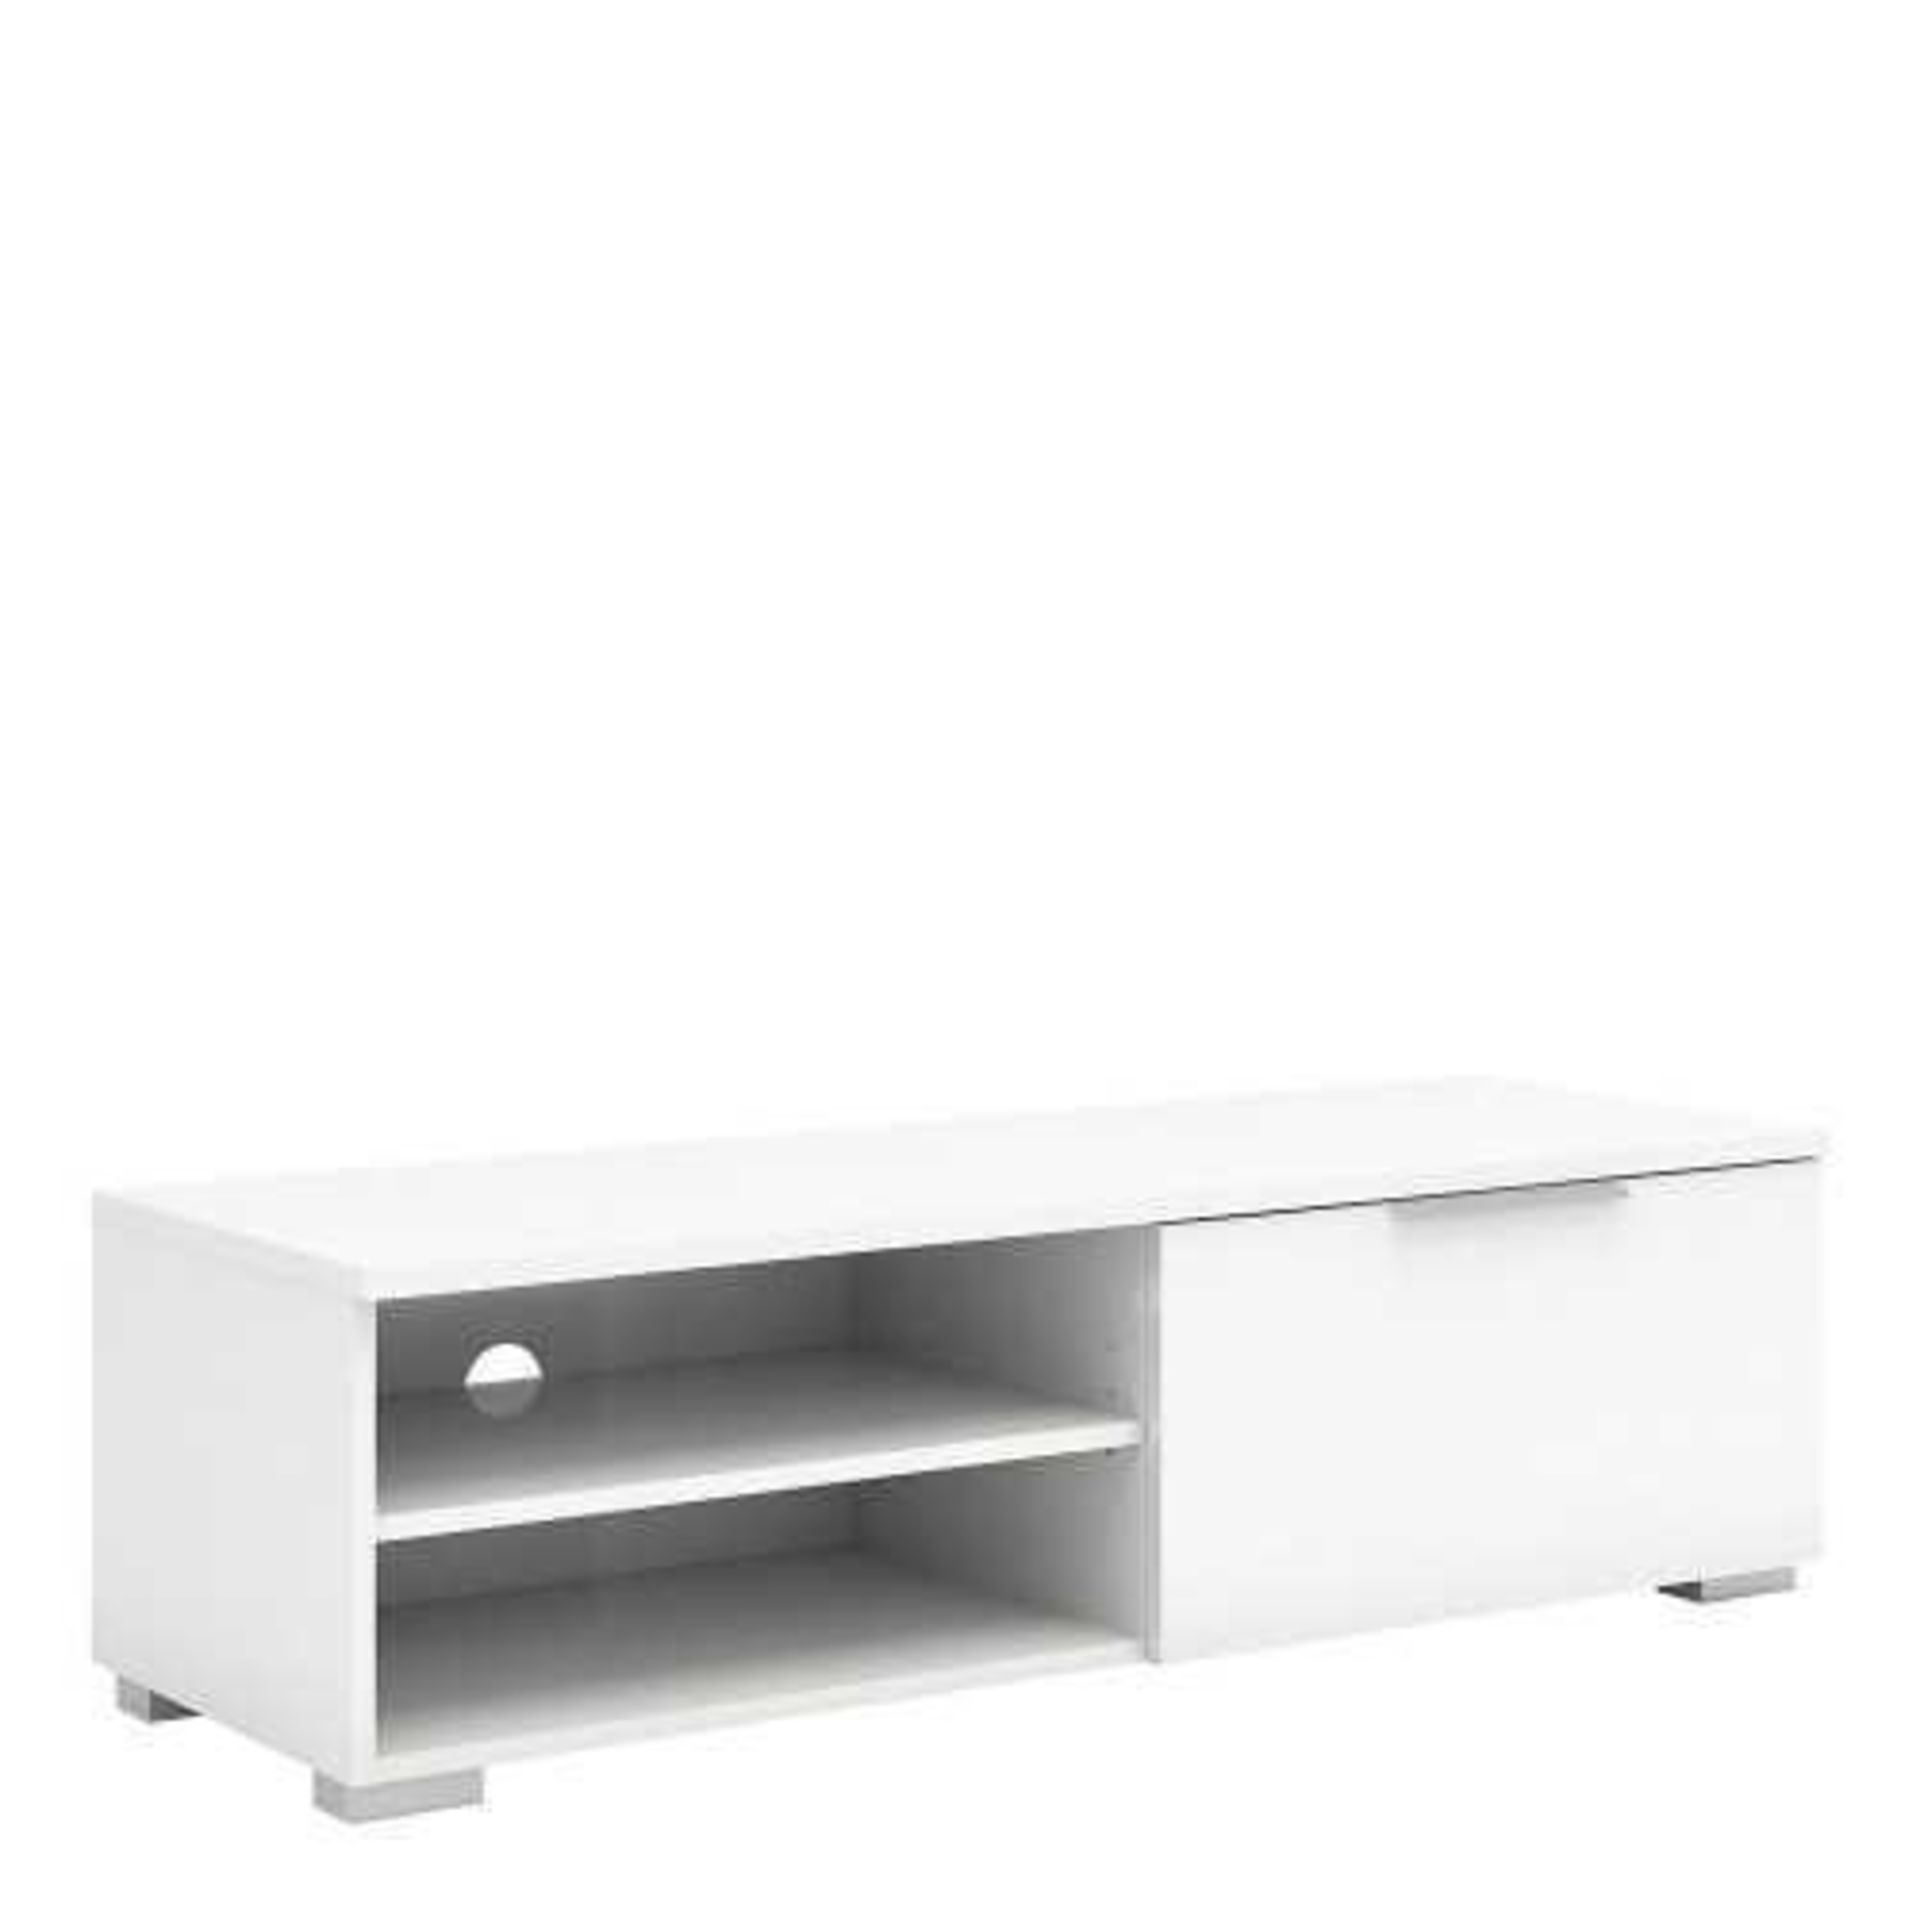 RRP £200 - New Boxed 'Mikado' Television Unit In White High Gloss